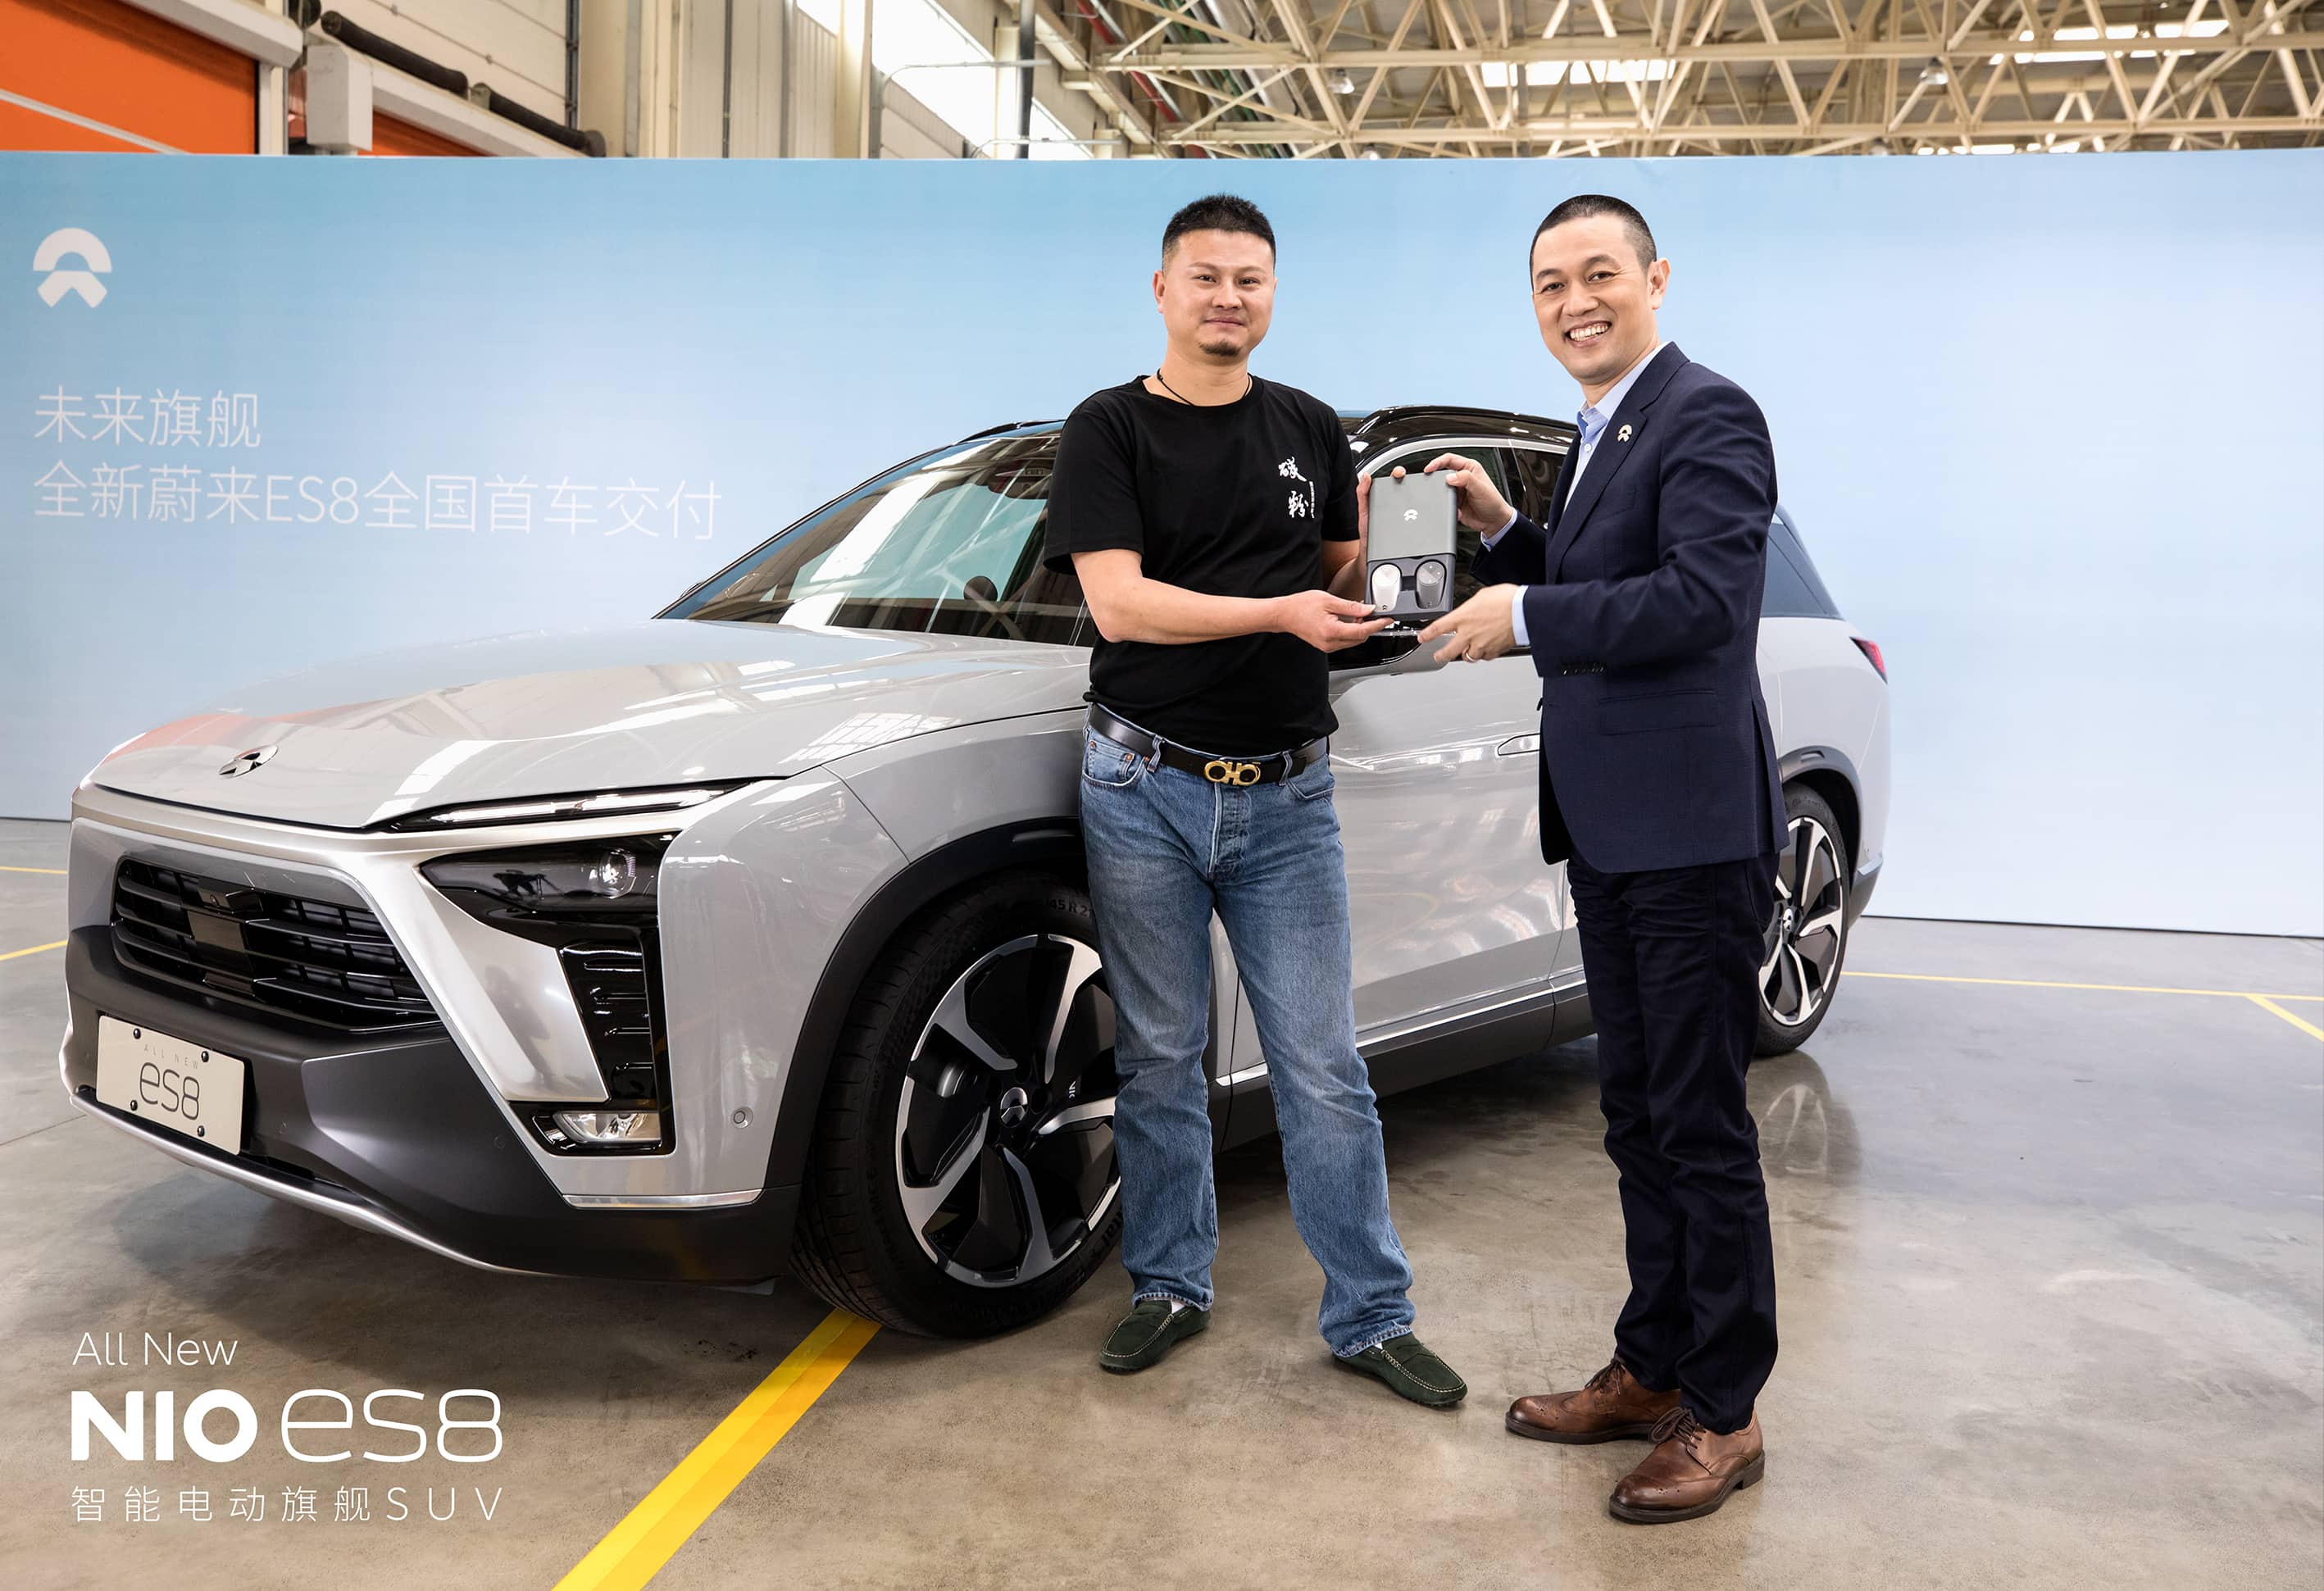 Nio The All New Nio Es8 Smart Electric Flagship Suv Commences Delivery